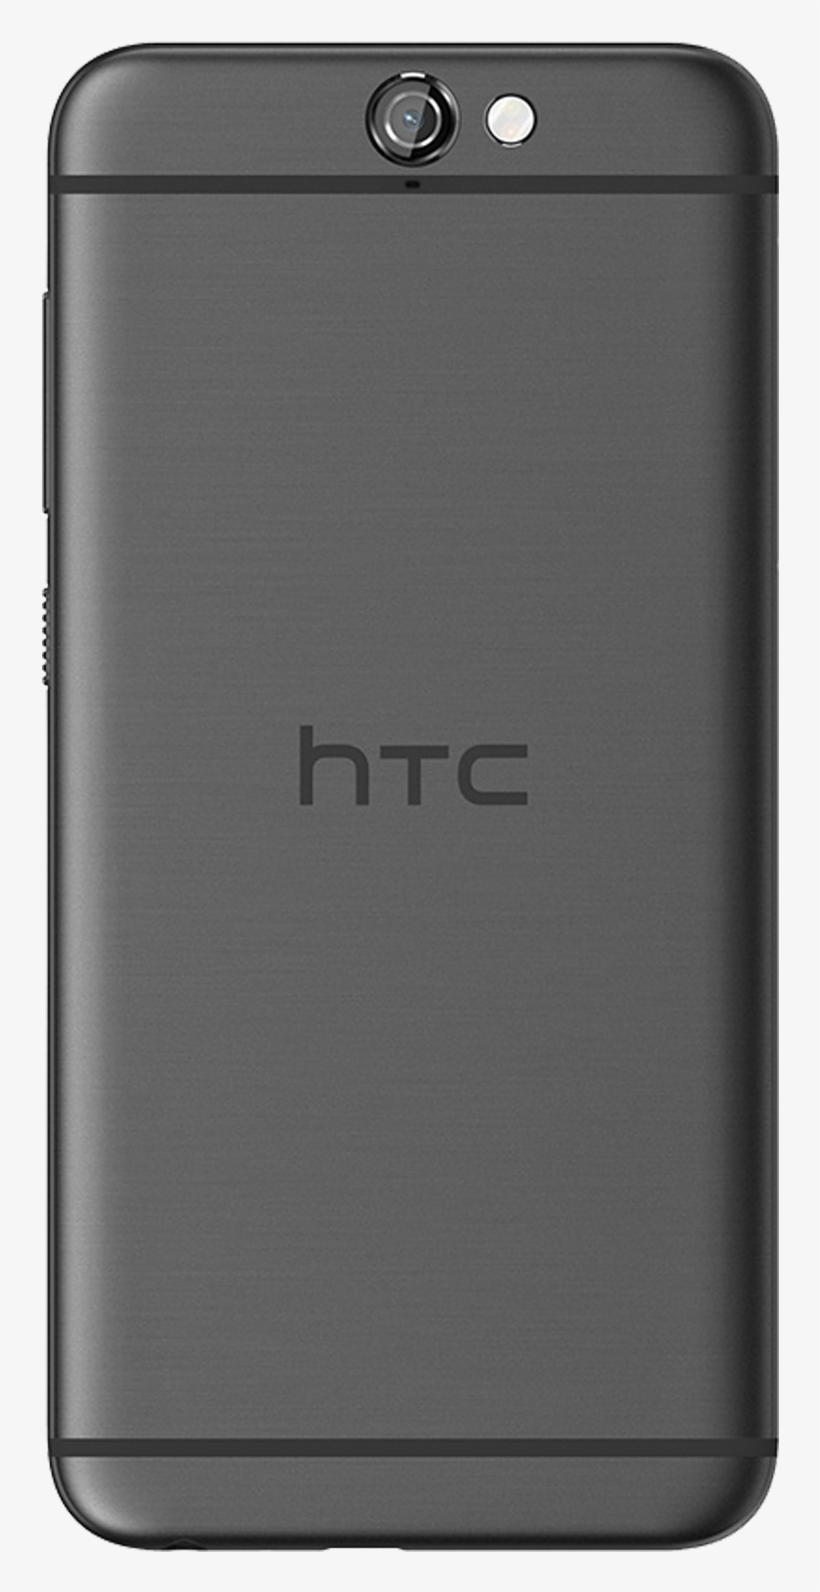 The One A9 Is Htc's First Phone Running Android - Htc One A9s 32gb Grey, transparent png #5992691